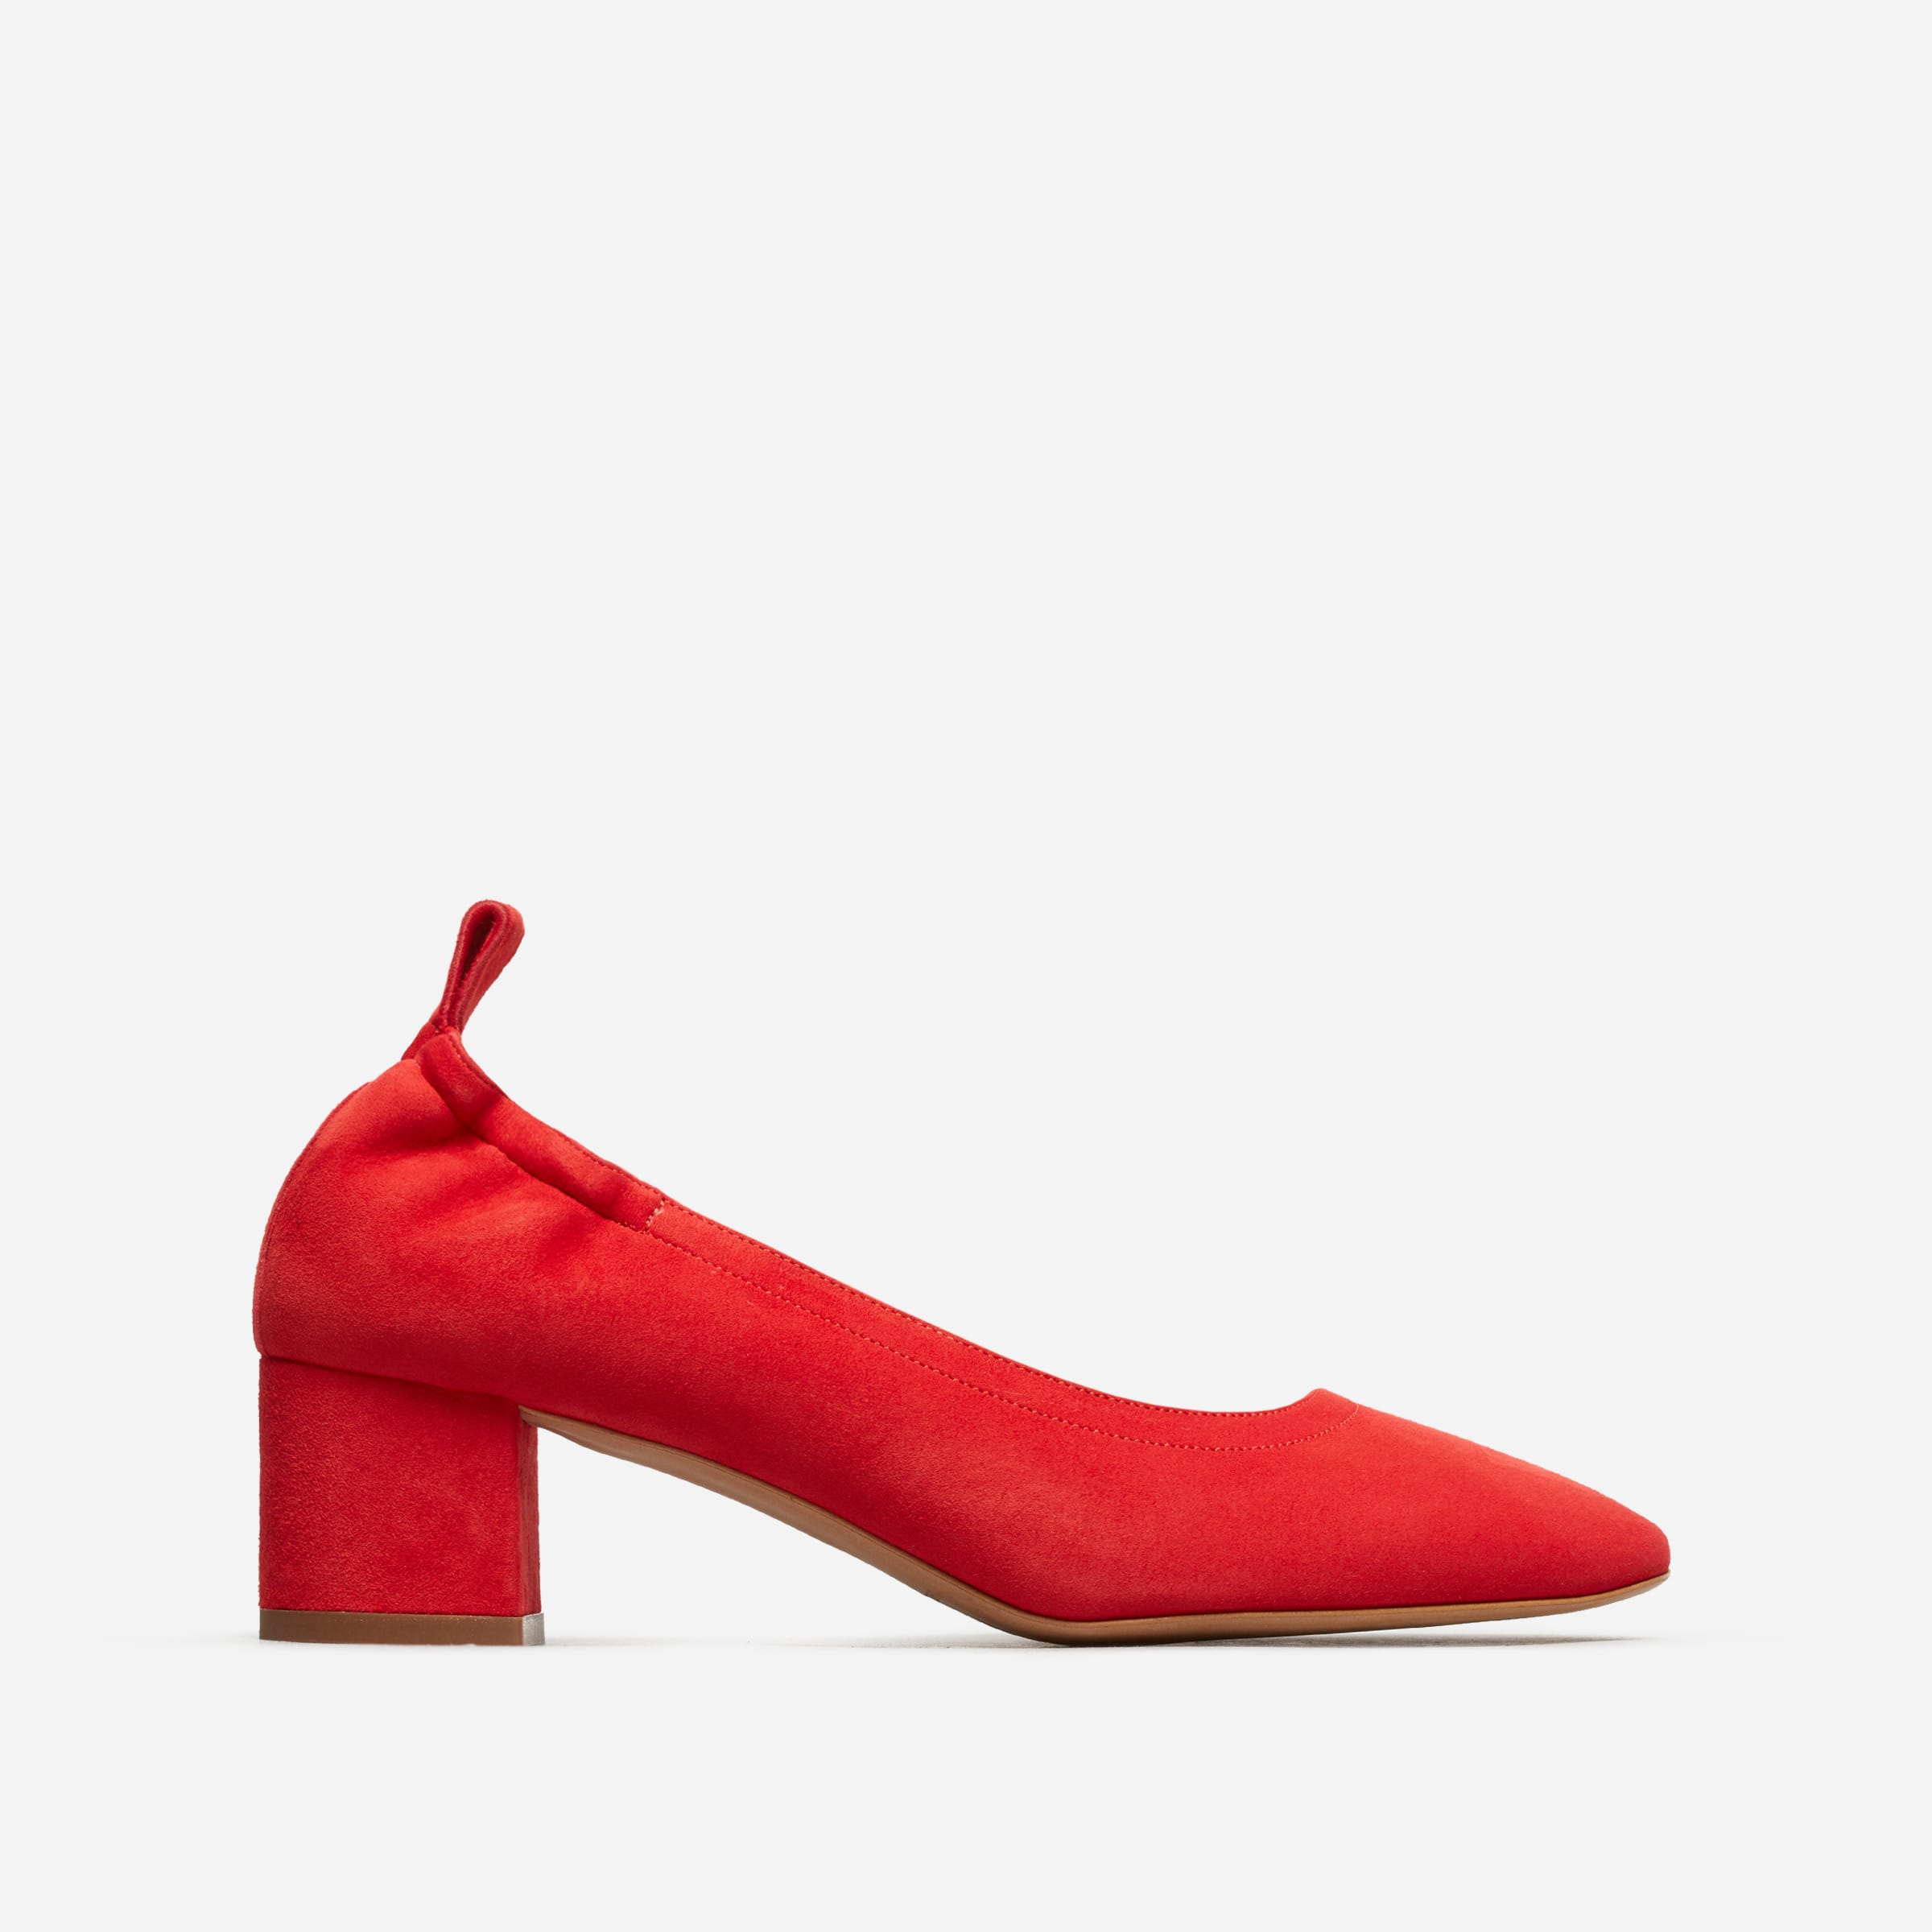 The Day Heel Red Suede – Everlane